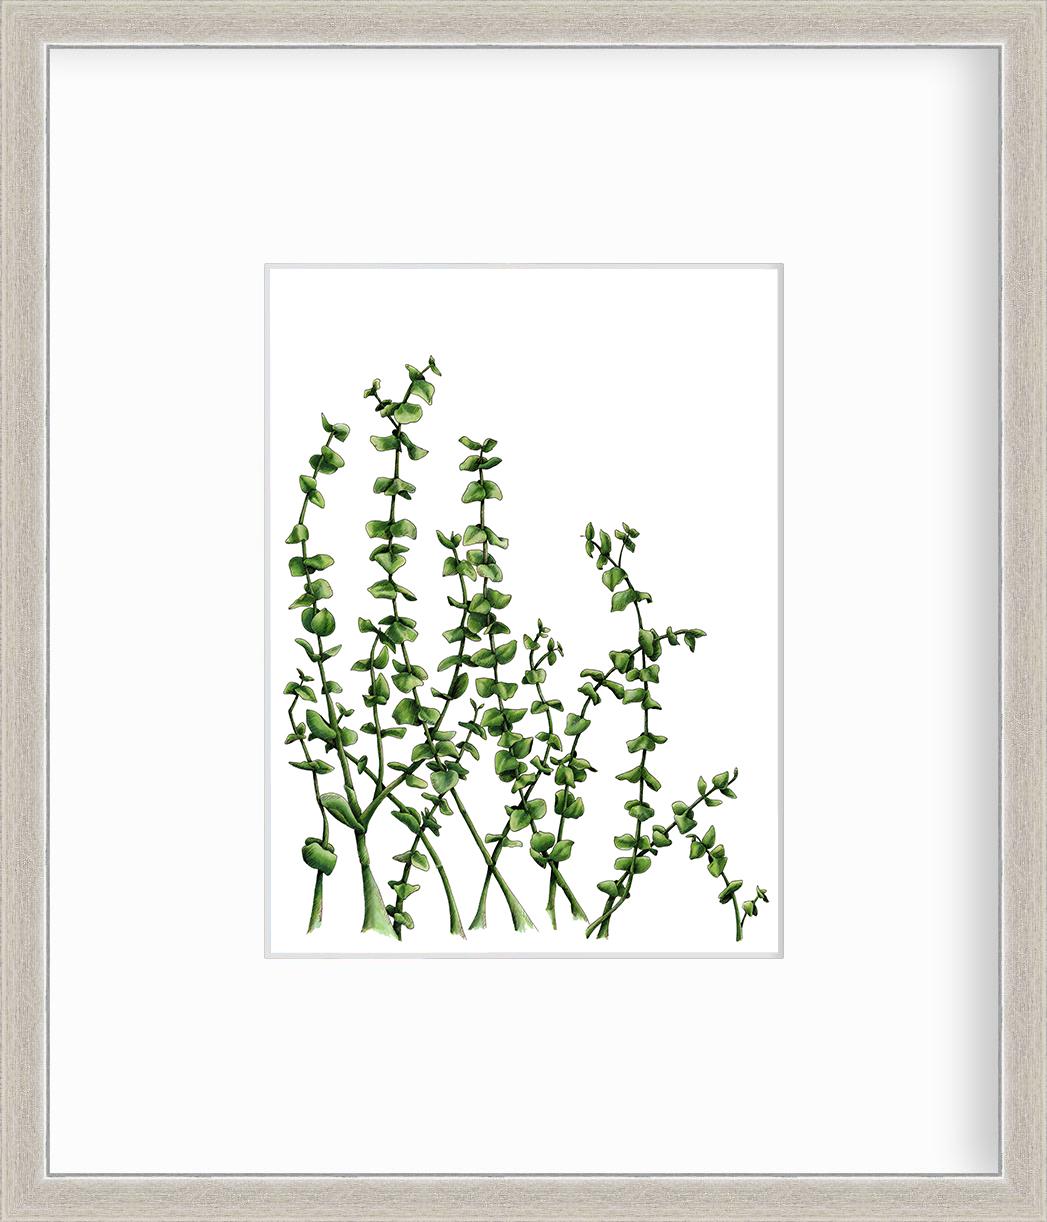 This limited edition botanical print by Elizabeth Iadicicco captures wild eucalyptus leaves on a minimalist white background. This print is an edition size of 25. Printed on premium fine art paper, this print ships matted and framed in a